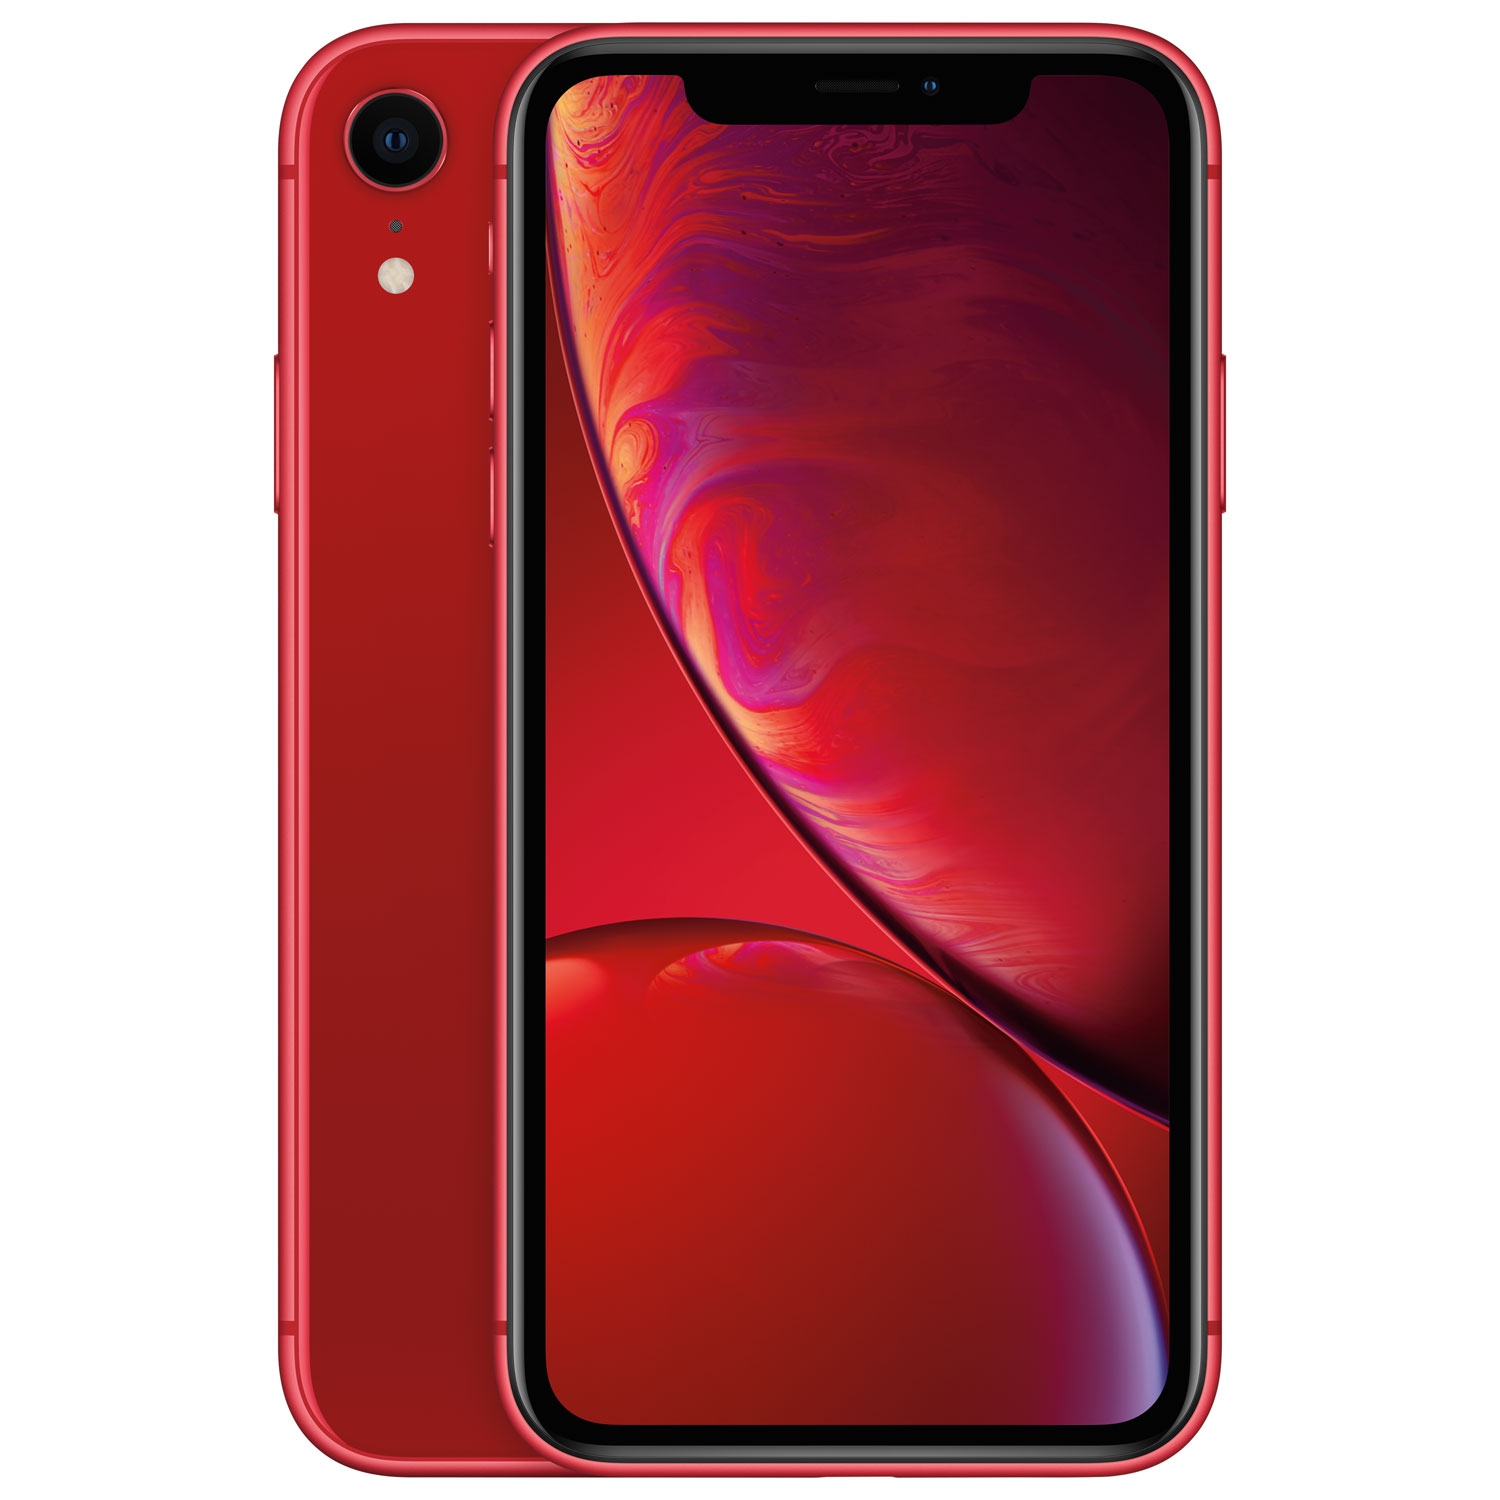 Apple iPhone XR 128GB Smartphone - (Product)RED - Unlocked - Open